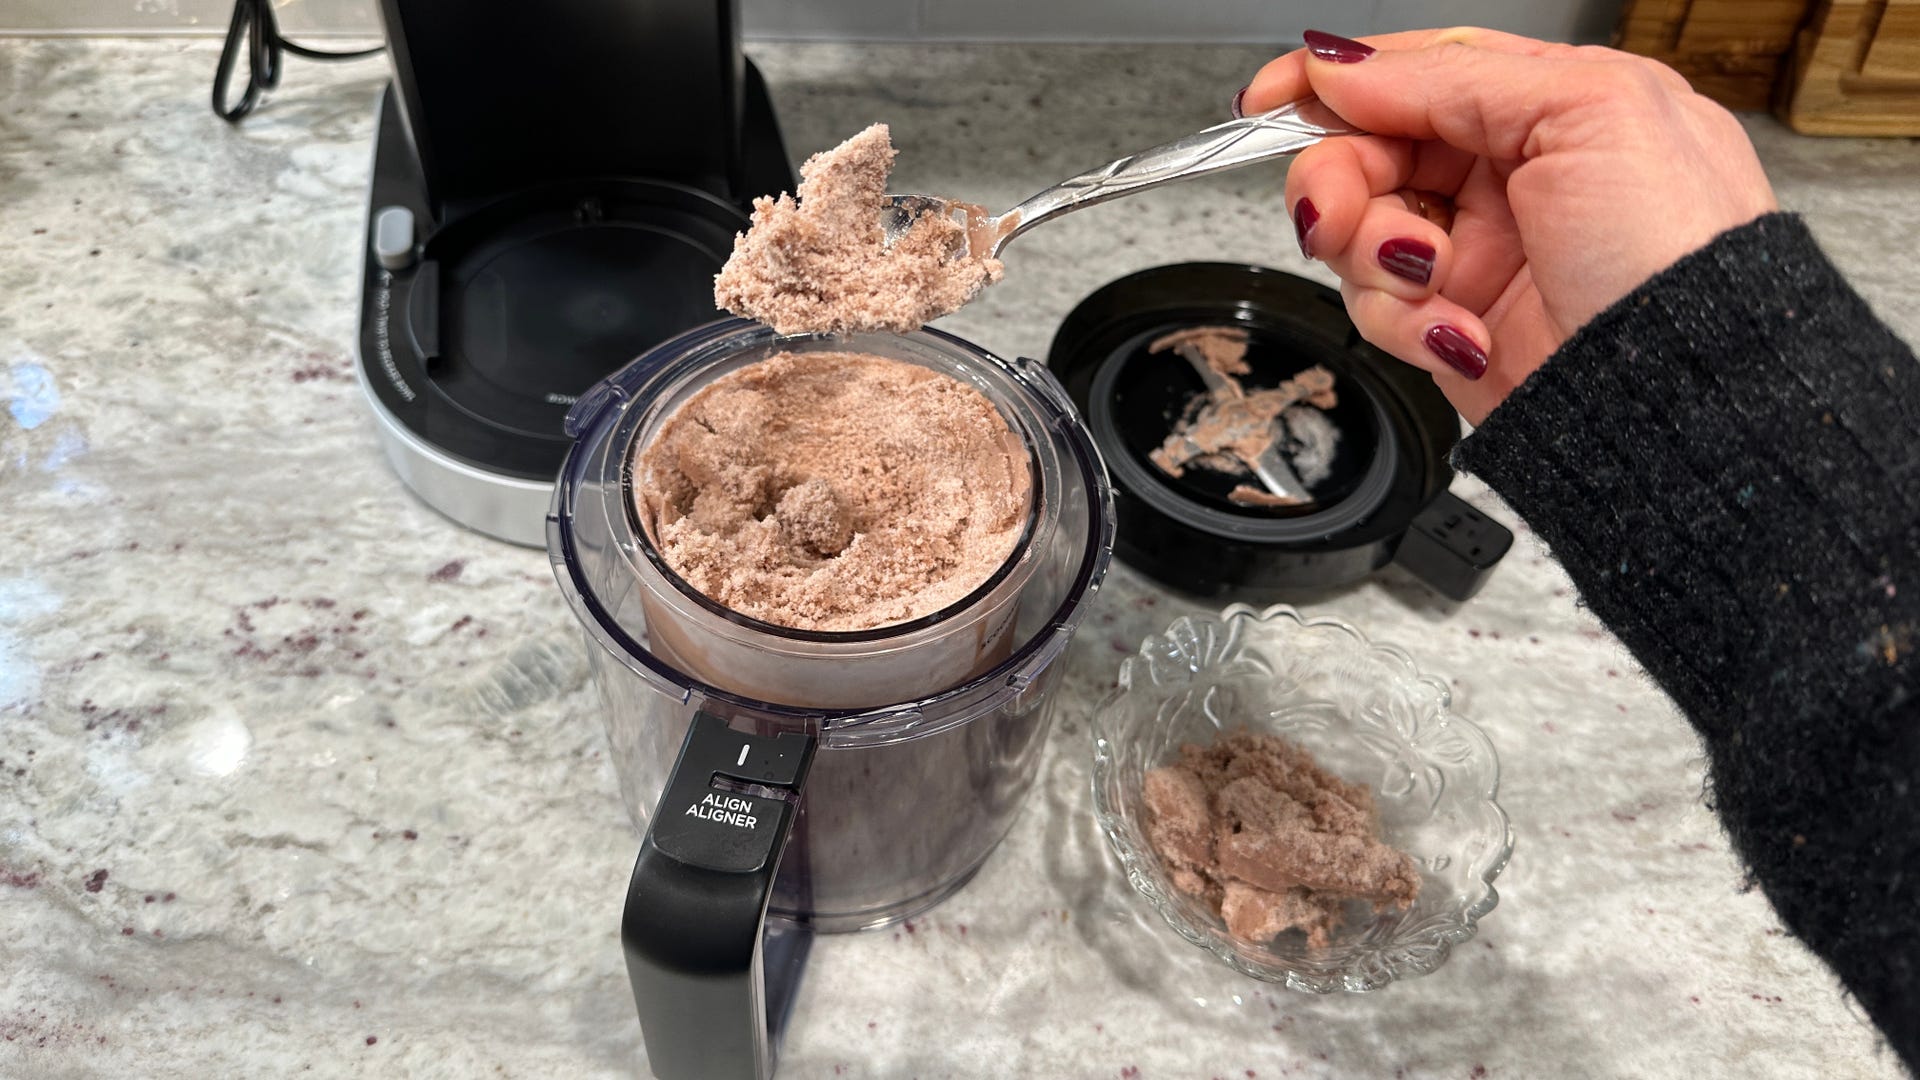 Ninja Creami Deluxe Creamiccino Recipe (With How-To for Original & Breeze)  - Healthy Slow Cooking